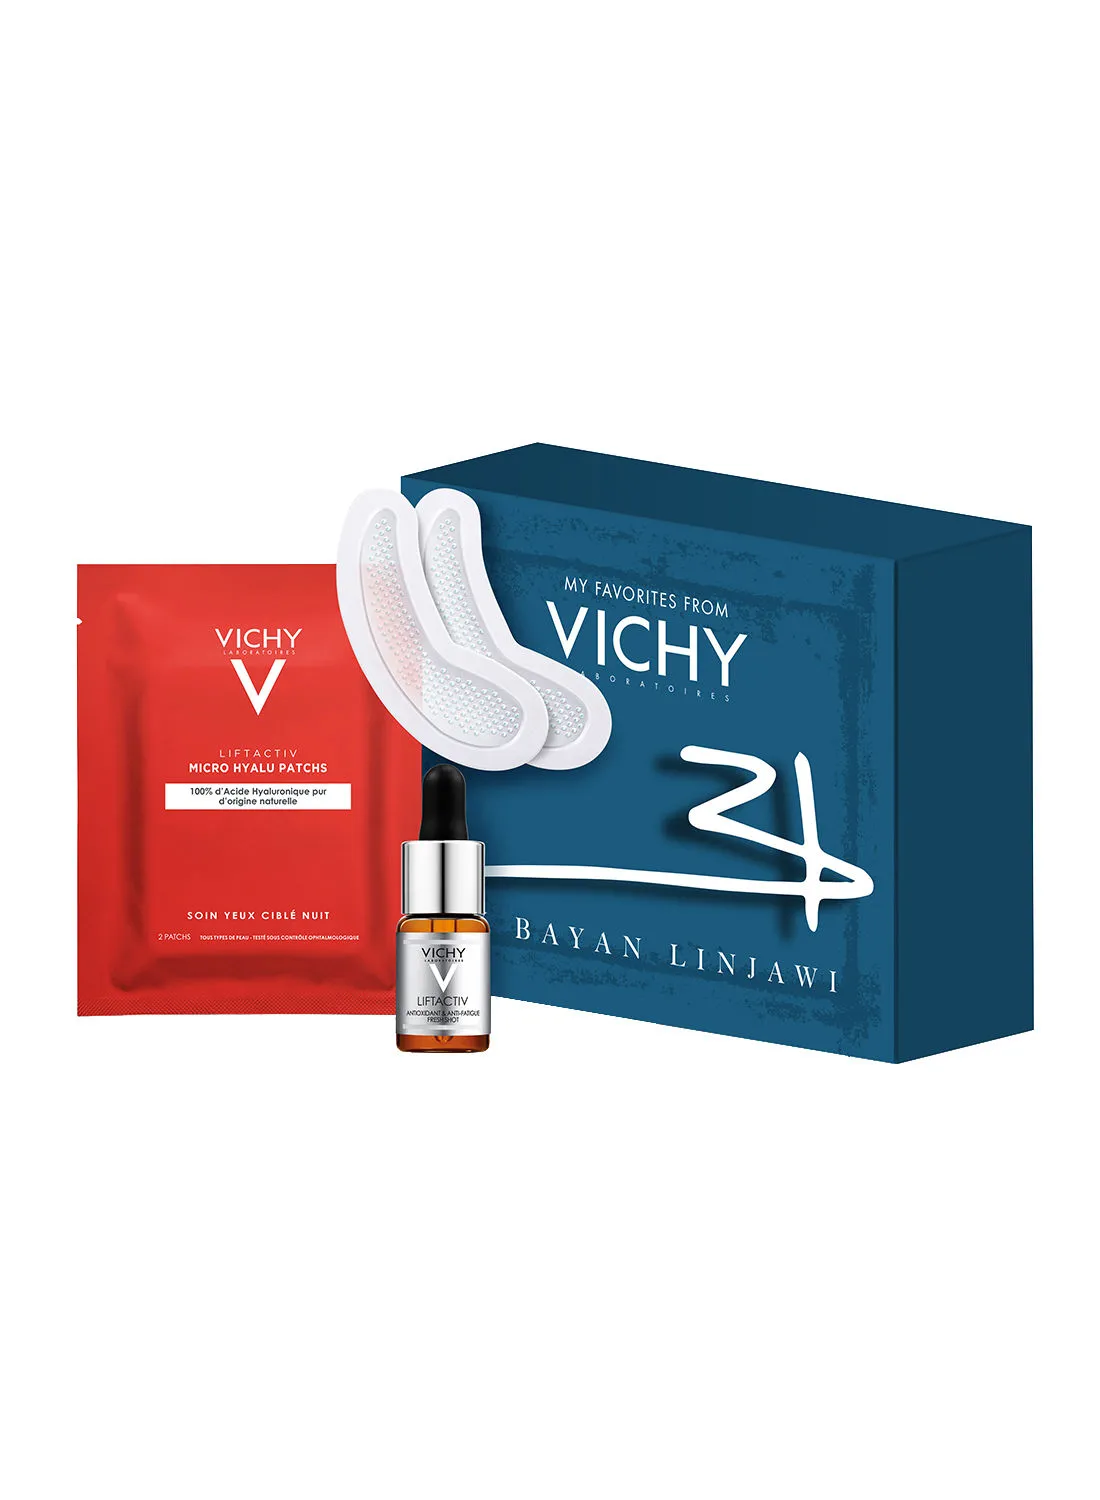 VICHY LiftActiv Vitamin C Anti Fatigue Serum With 2 LiftActiv Specialist Eye Patch